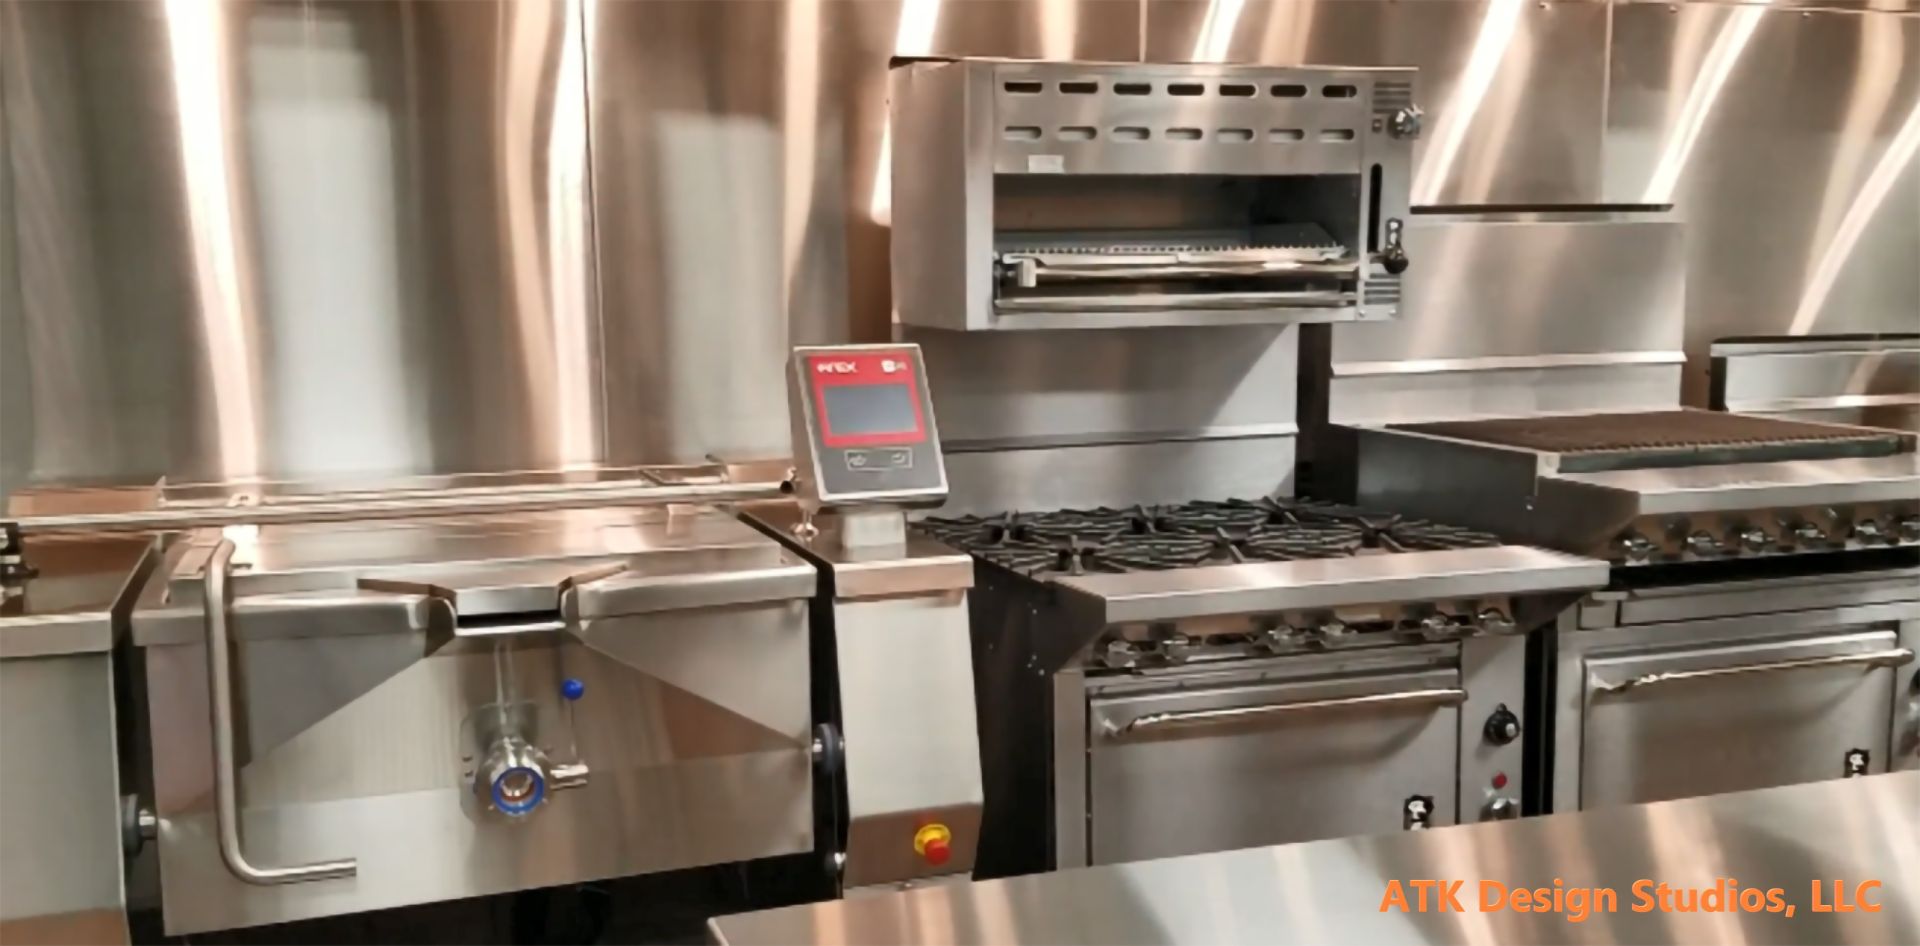 up close equipment culinary with atk